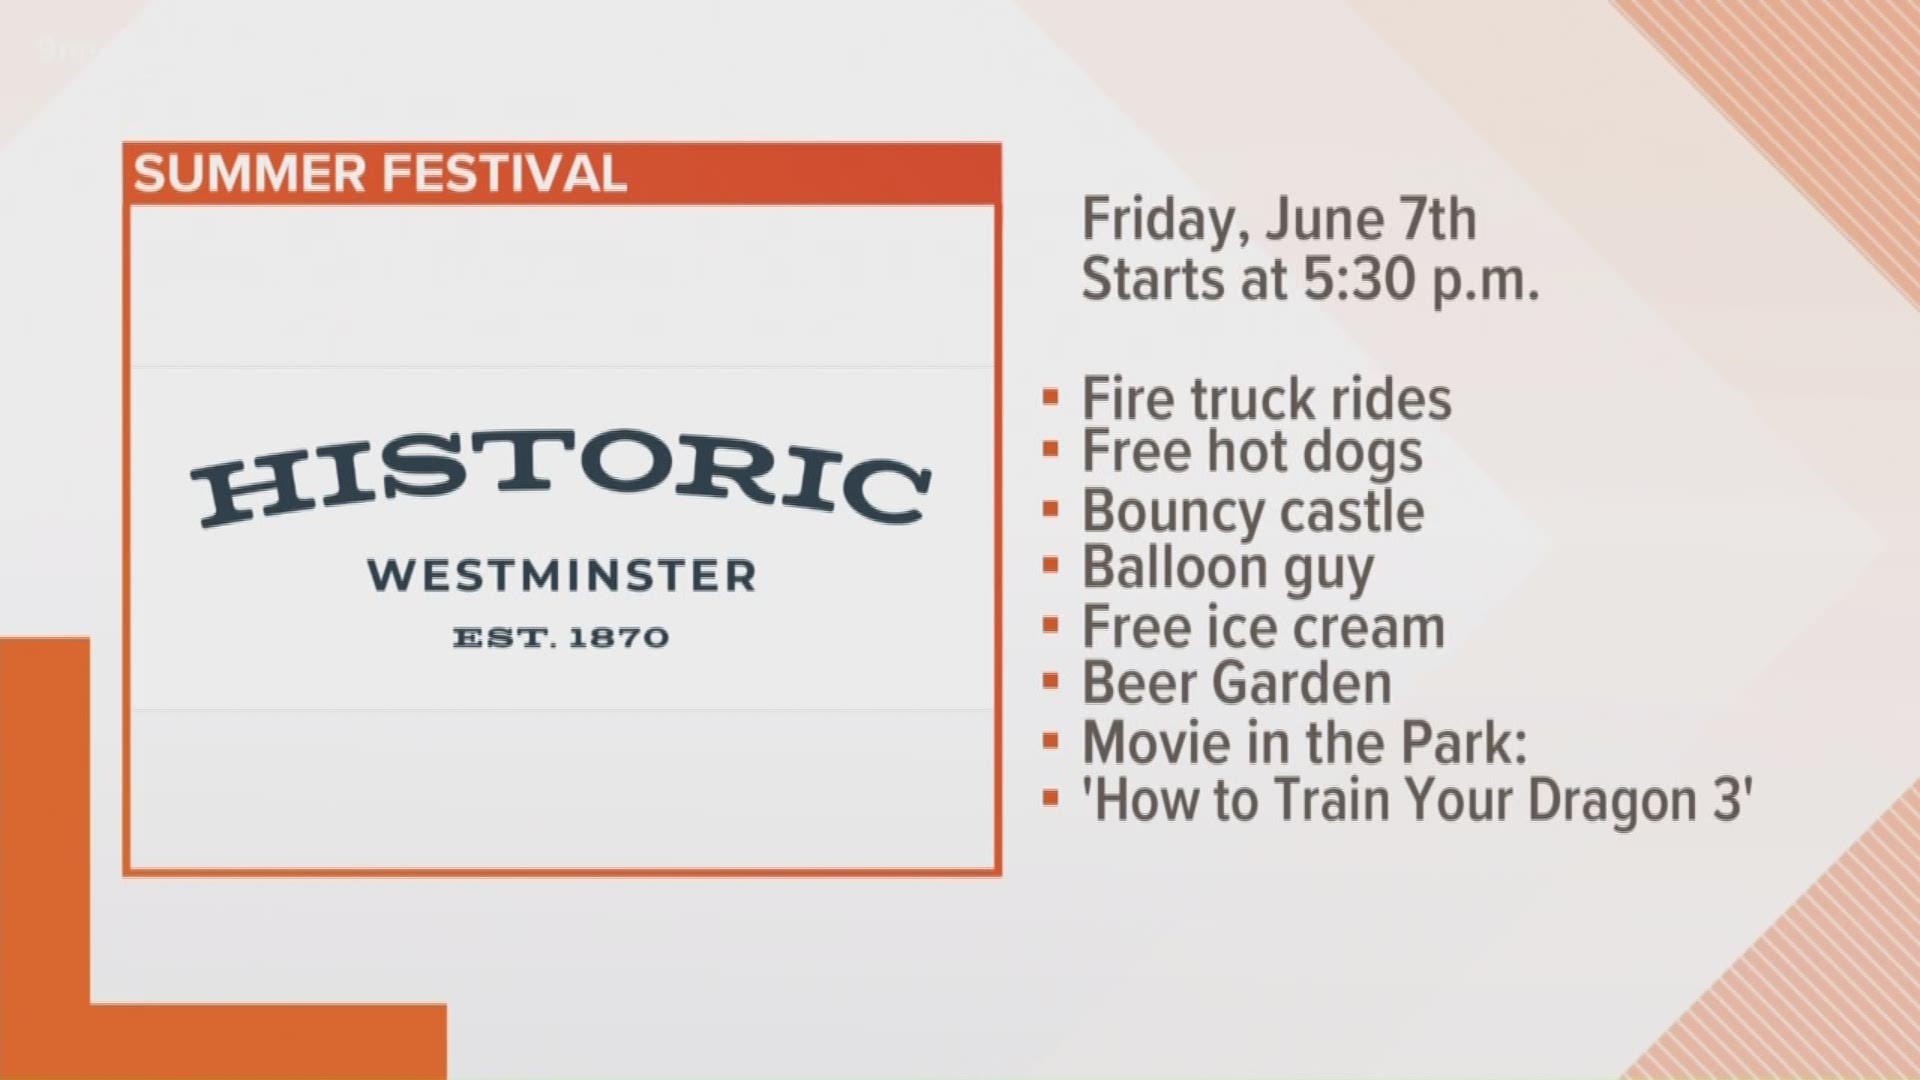 The Historic Westminster Summer Festival is set for Friday and Saturday in the Historic Westminster Arts District. Friday’s festival begins at 5:30 p.m. with food, beer garden, live music, kids’ activities, fire truck rides, free ice cream and hot dogs and “How to Train Your Dragon: The Hidden World.” The festival will continue Saturday from 9 a.m. to 8 p.m. with crafts, vendors, live music, live entertainers, church yard sale, model train show, car and motorcycle show and more.